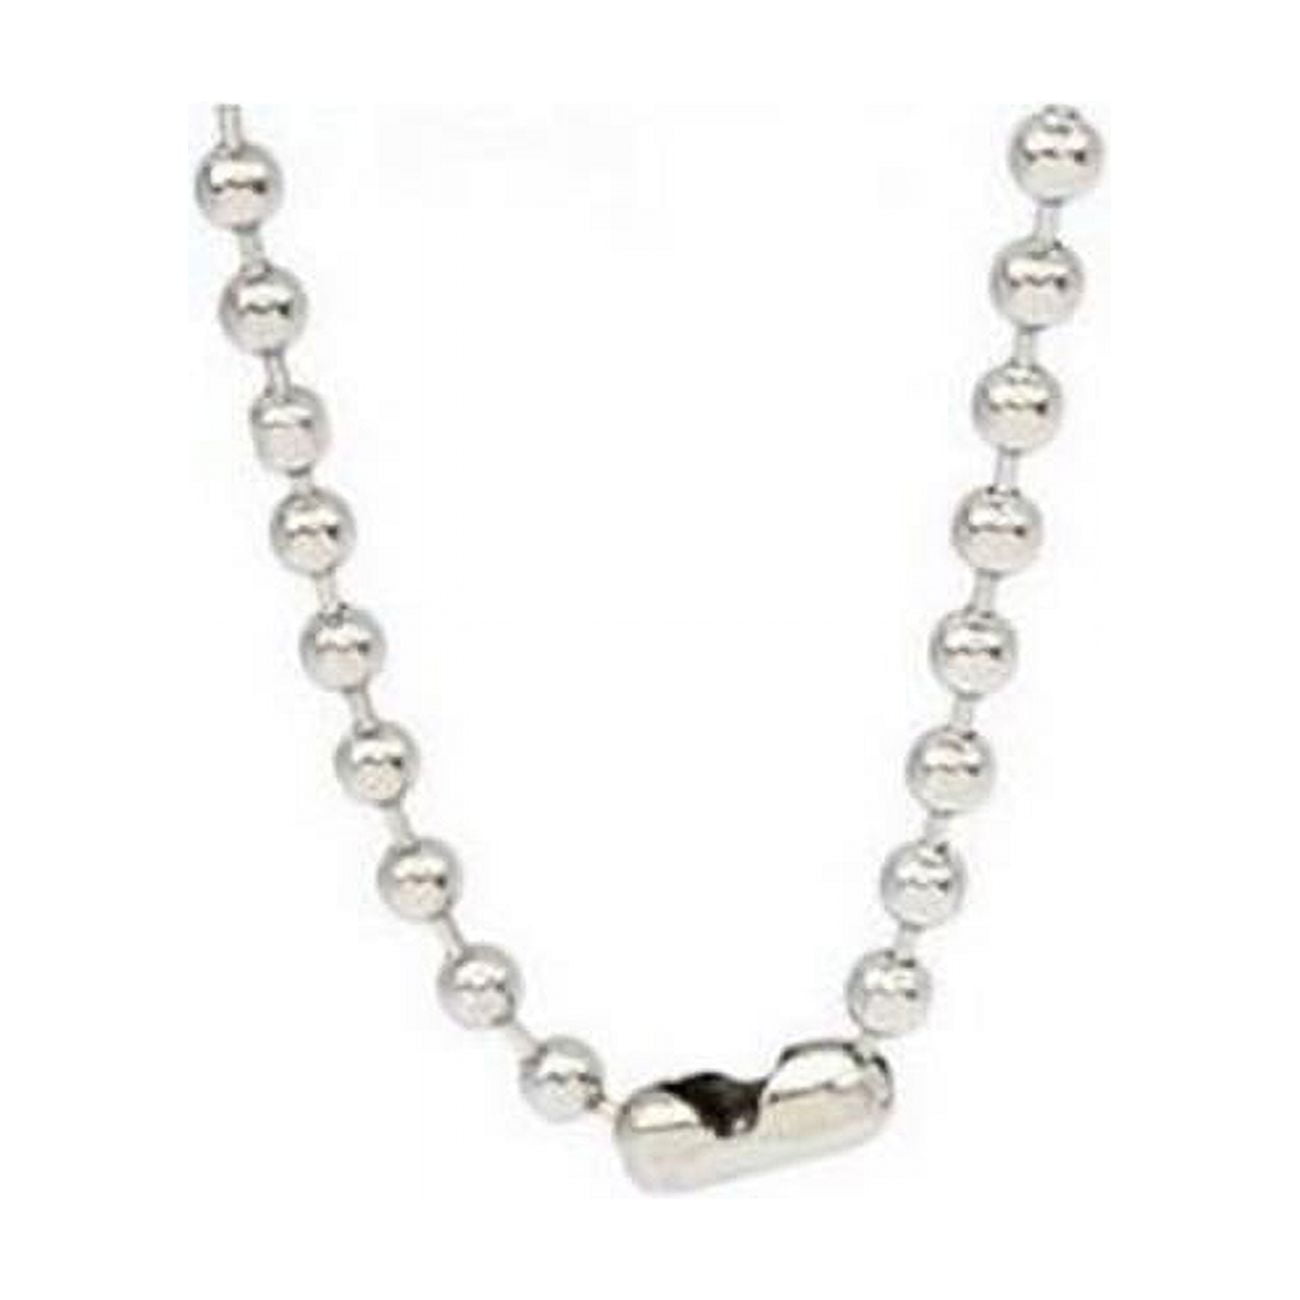 10 / 20pcs Stainless Steel Extension Chain Chain Extensions for Necklaces  Stainless Steel Jewelry Chains Extenders Chains 